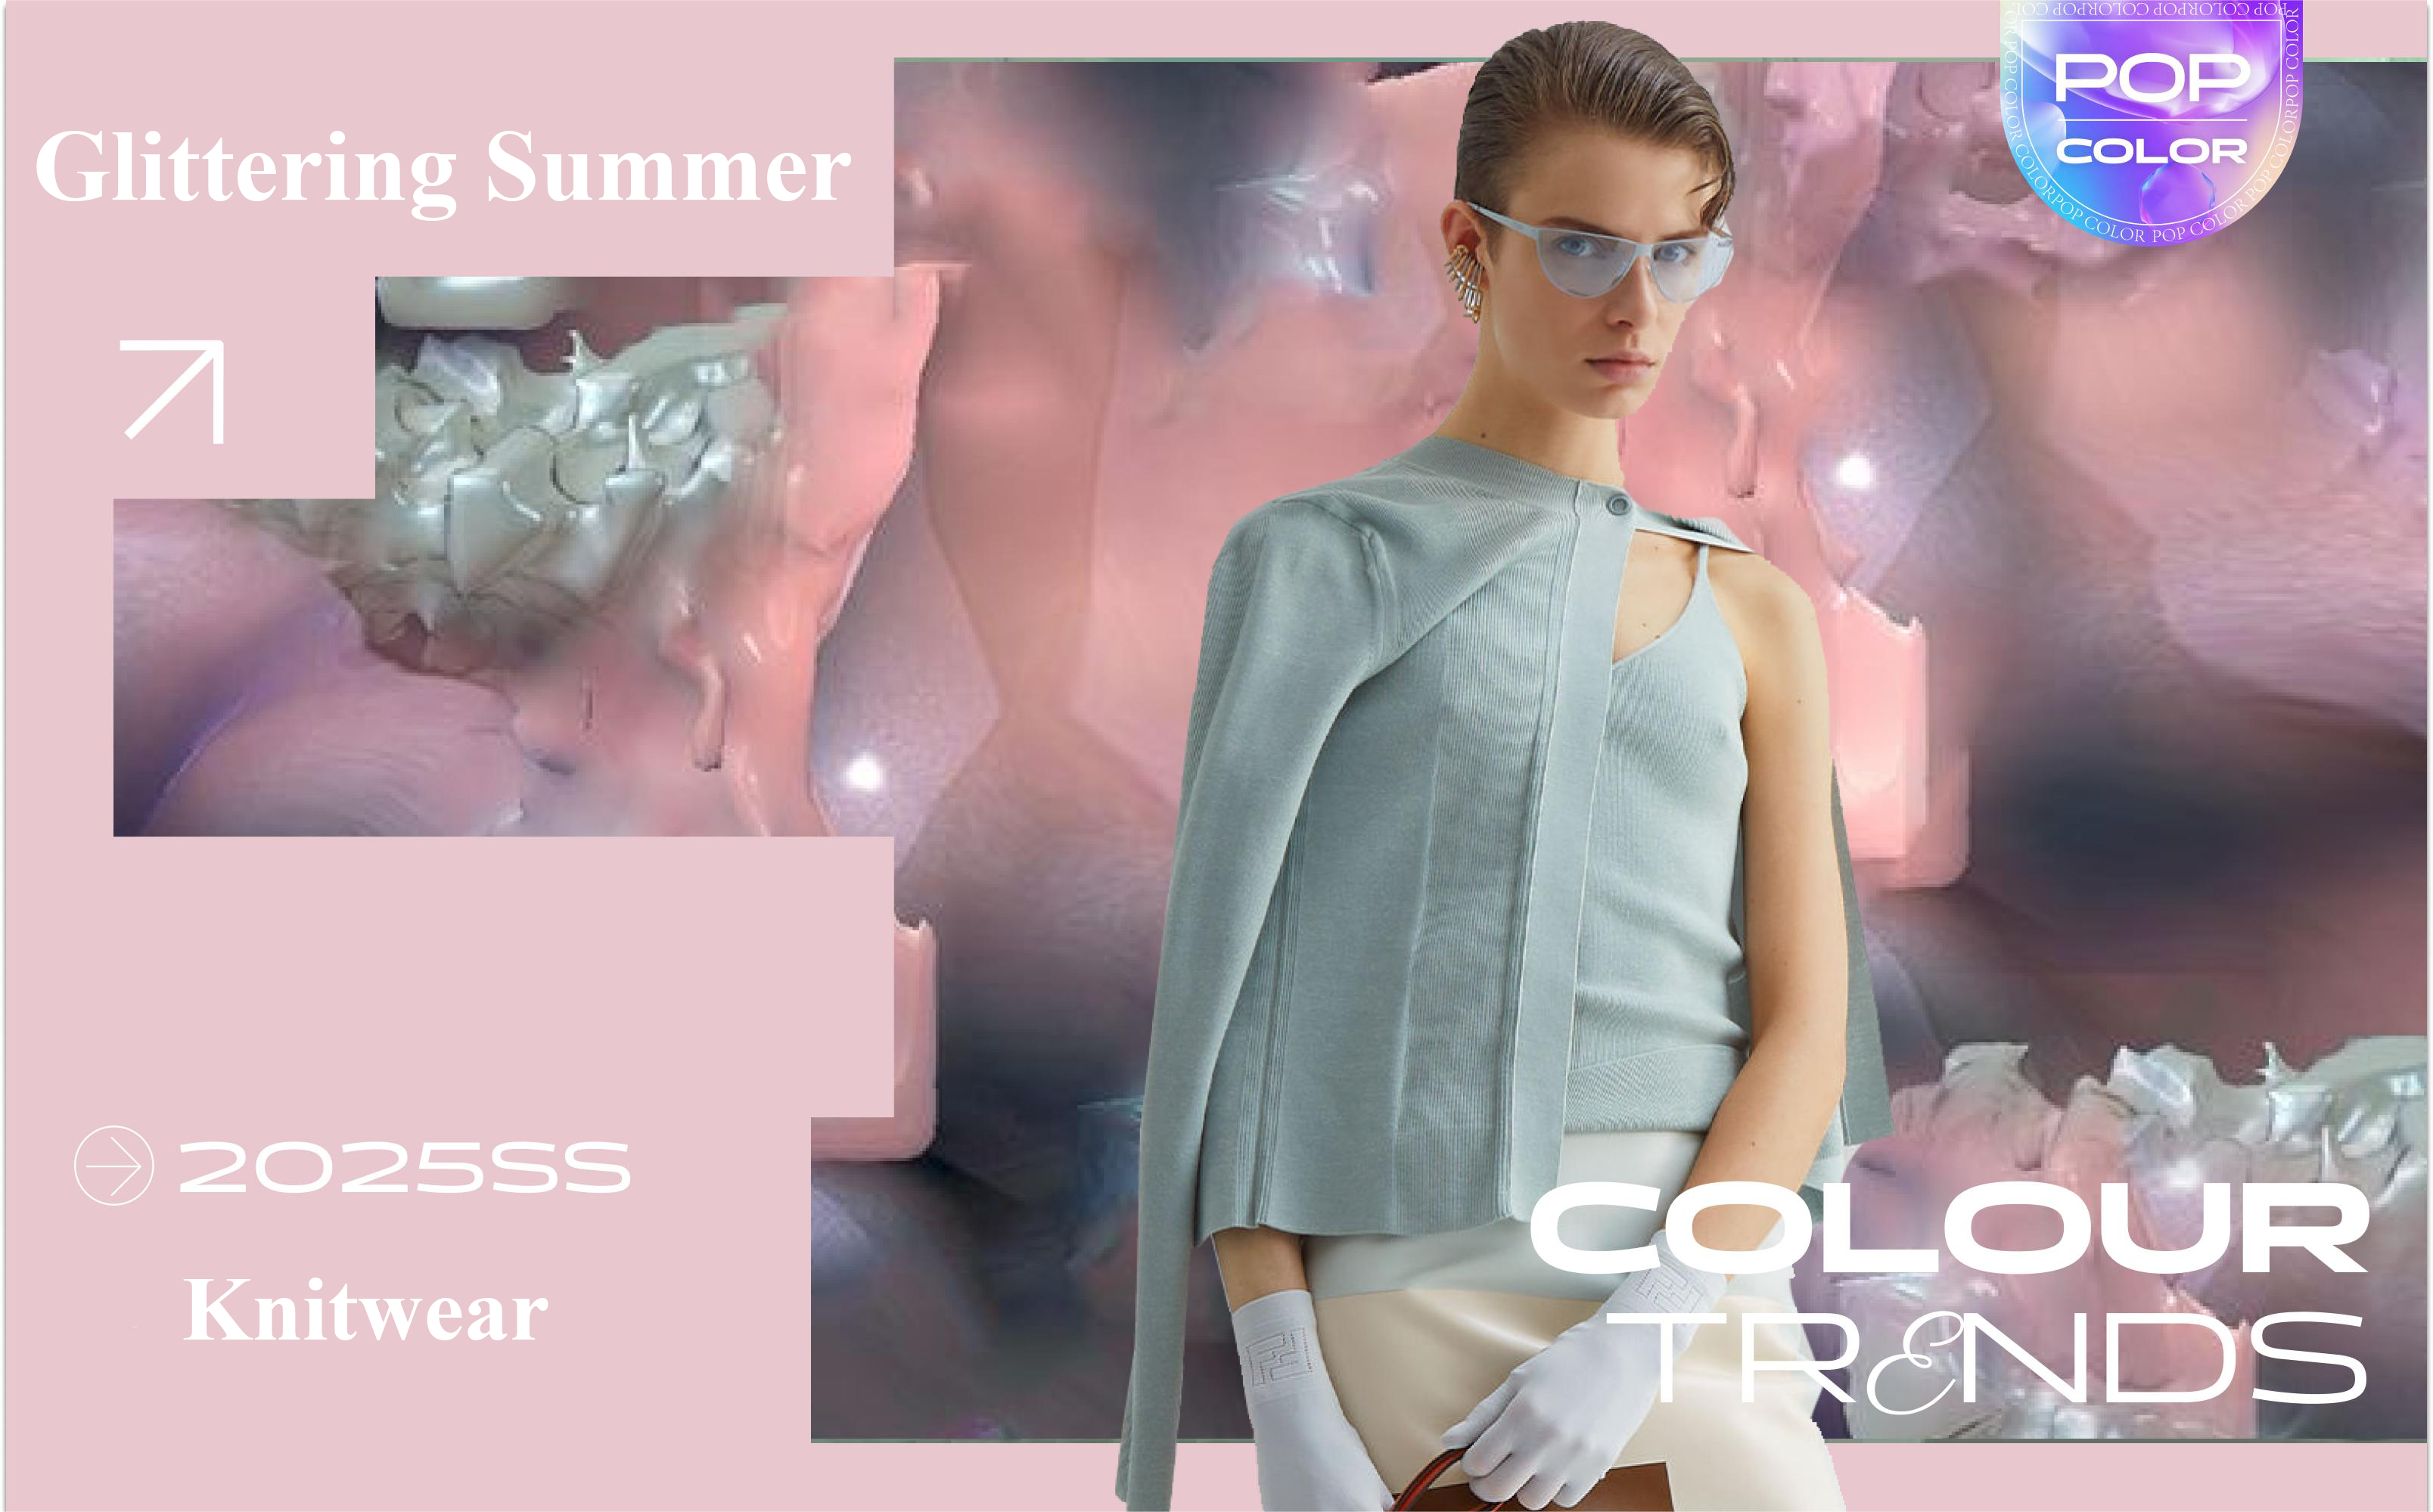 Glittering Summer -- The Color Trend for Mature Women's Knitwear